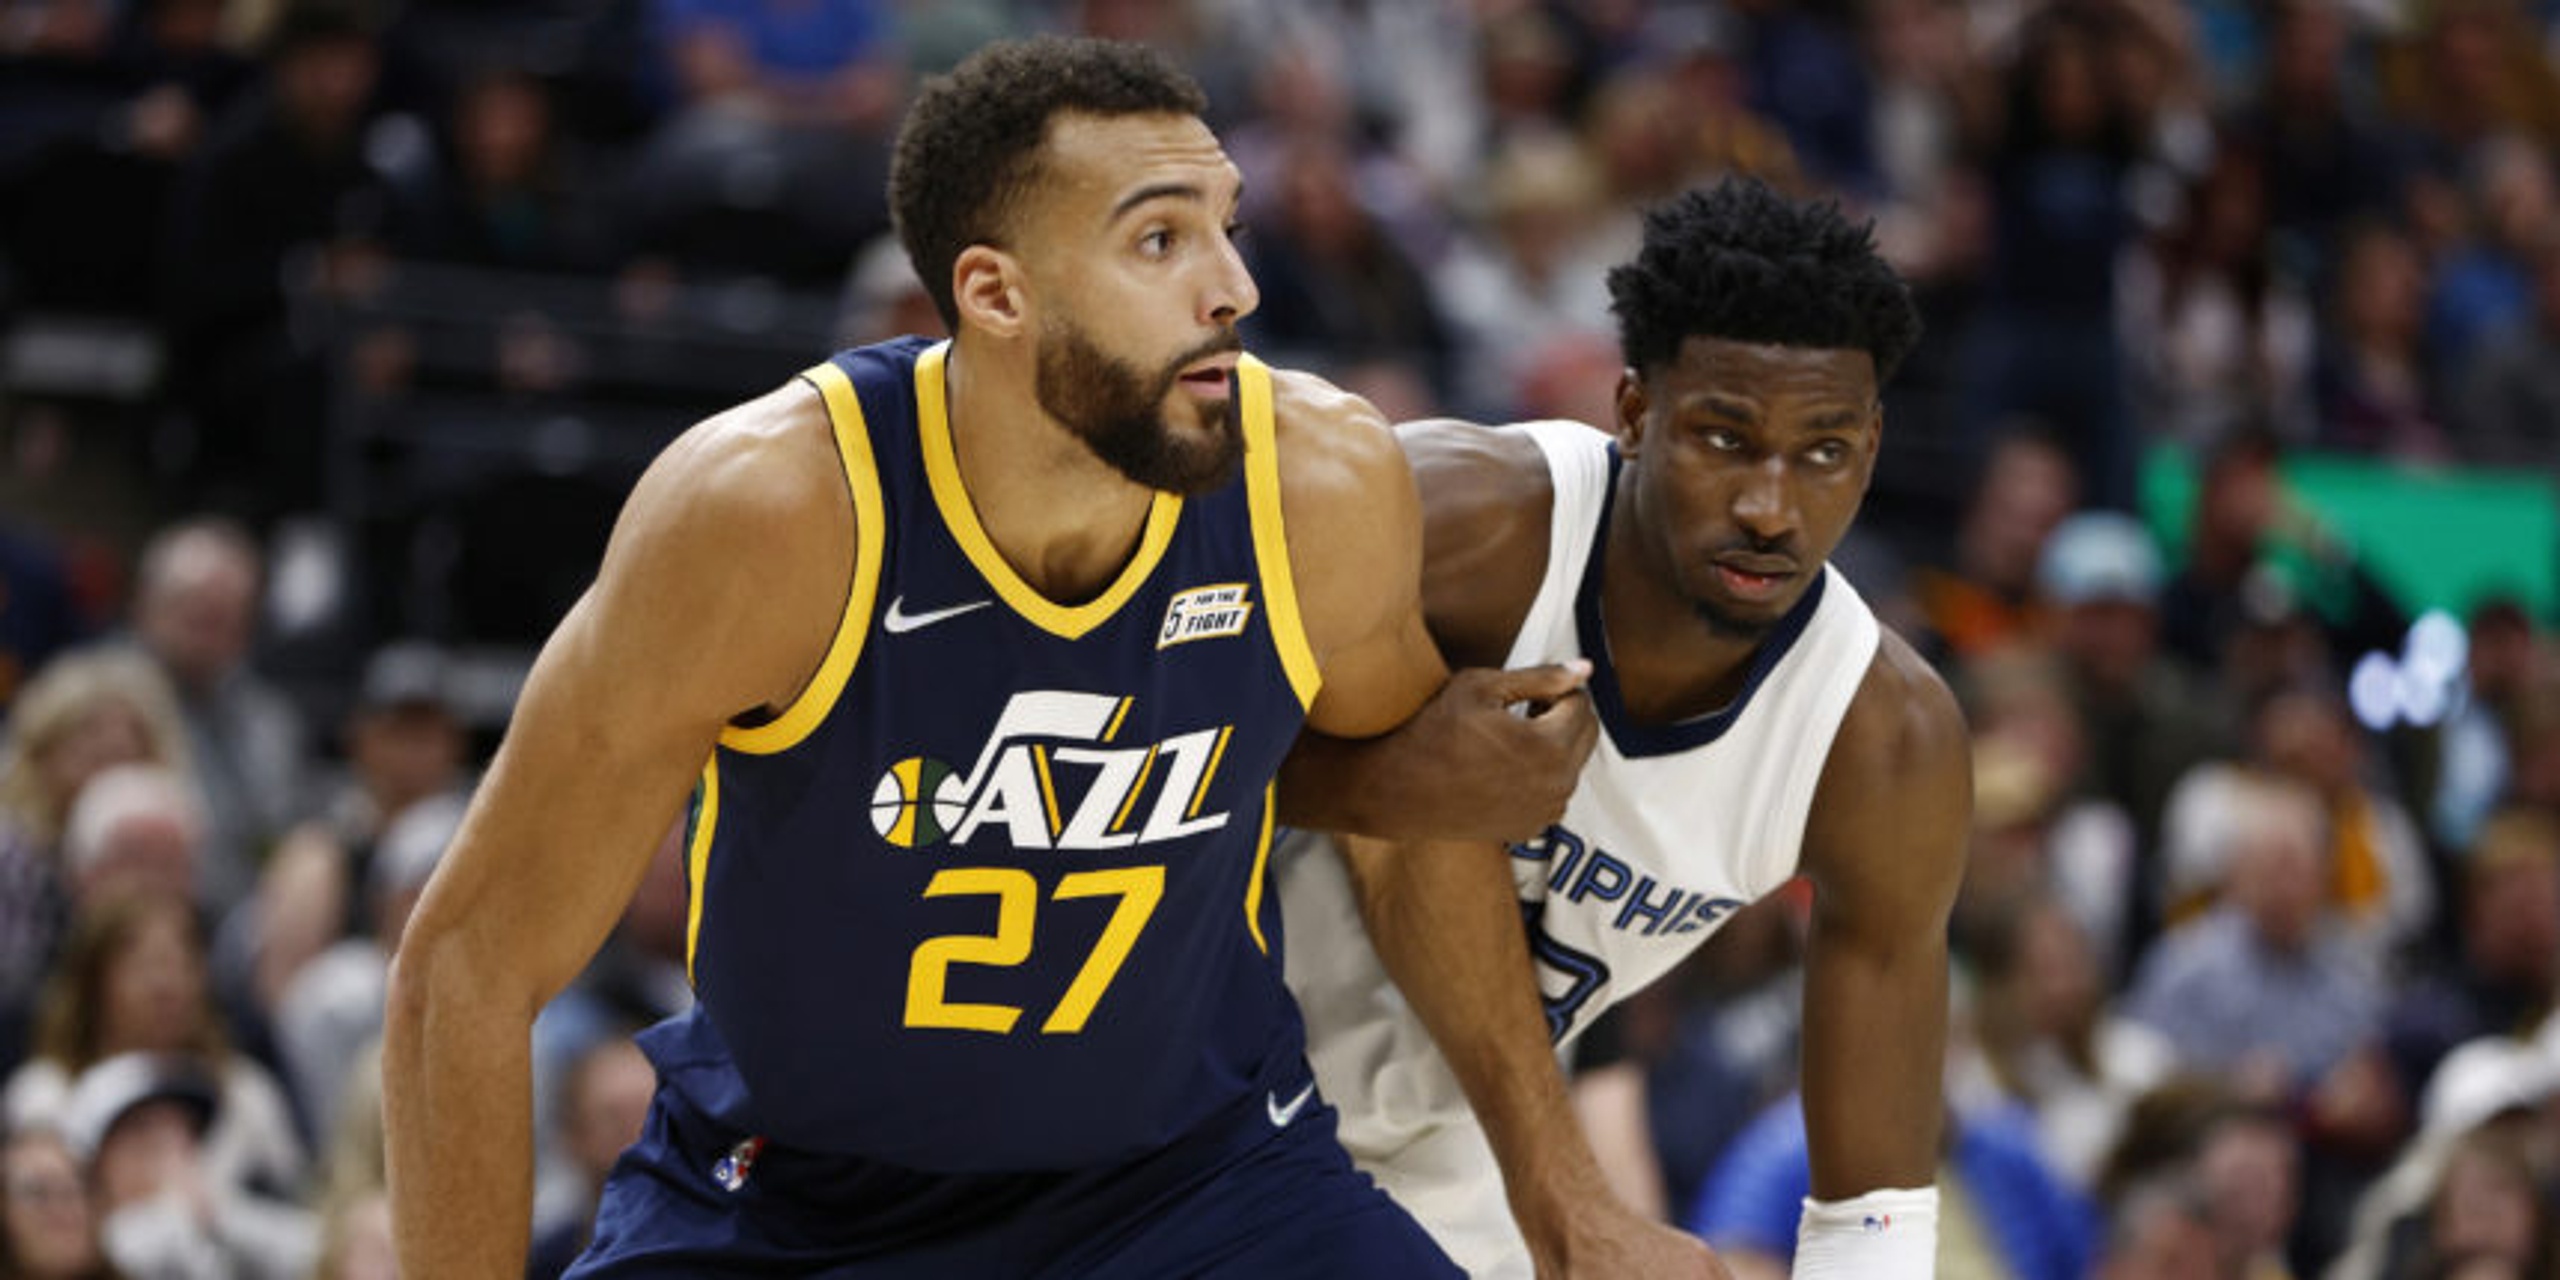 Jazz clinch playoff spot with 121-115 OT win over Grizzlies